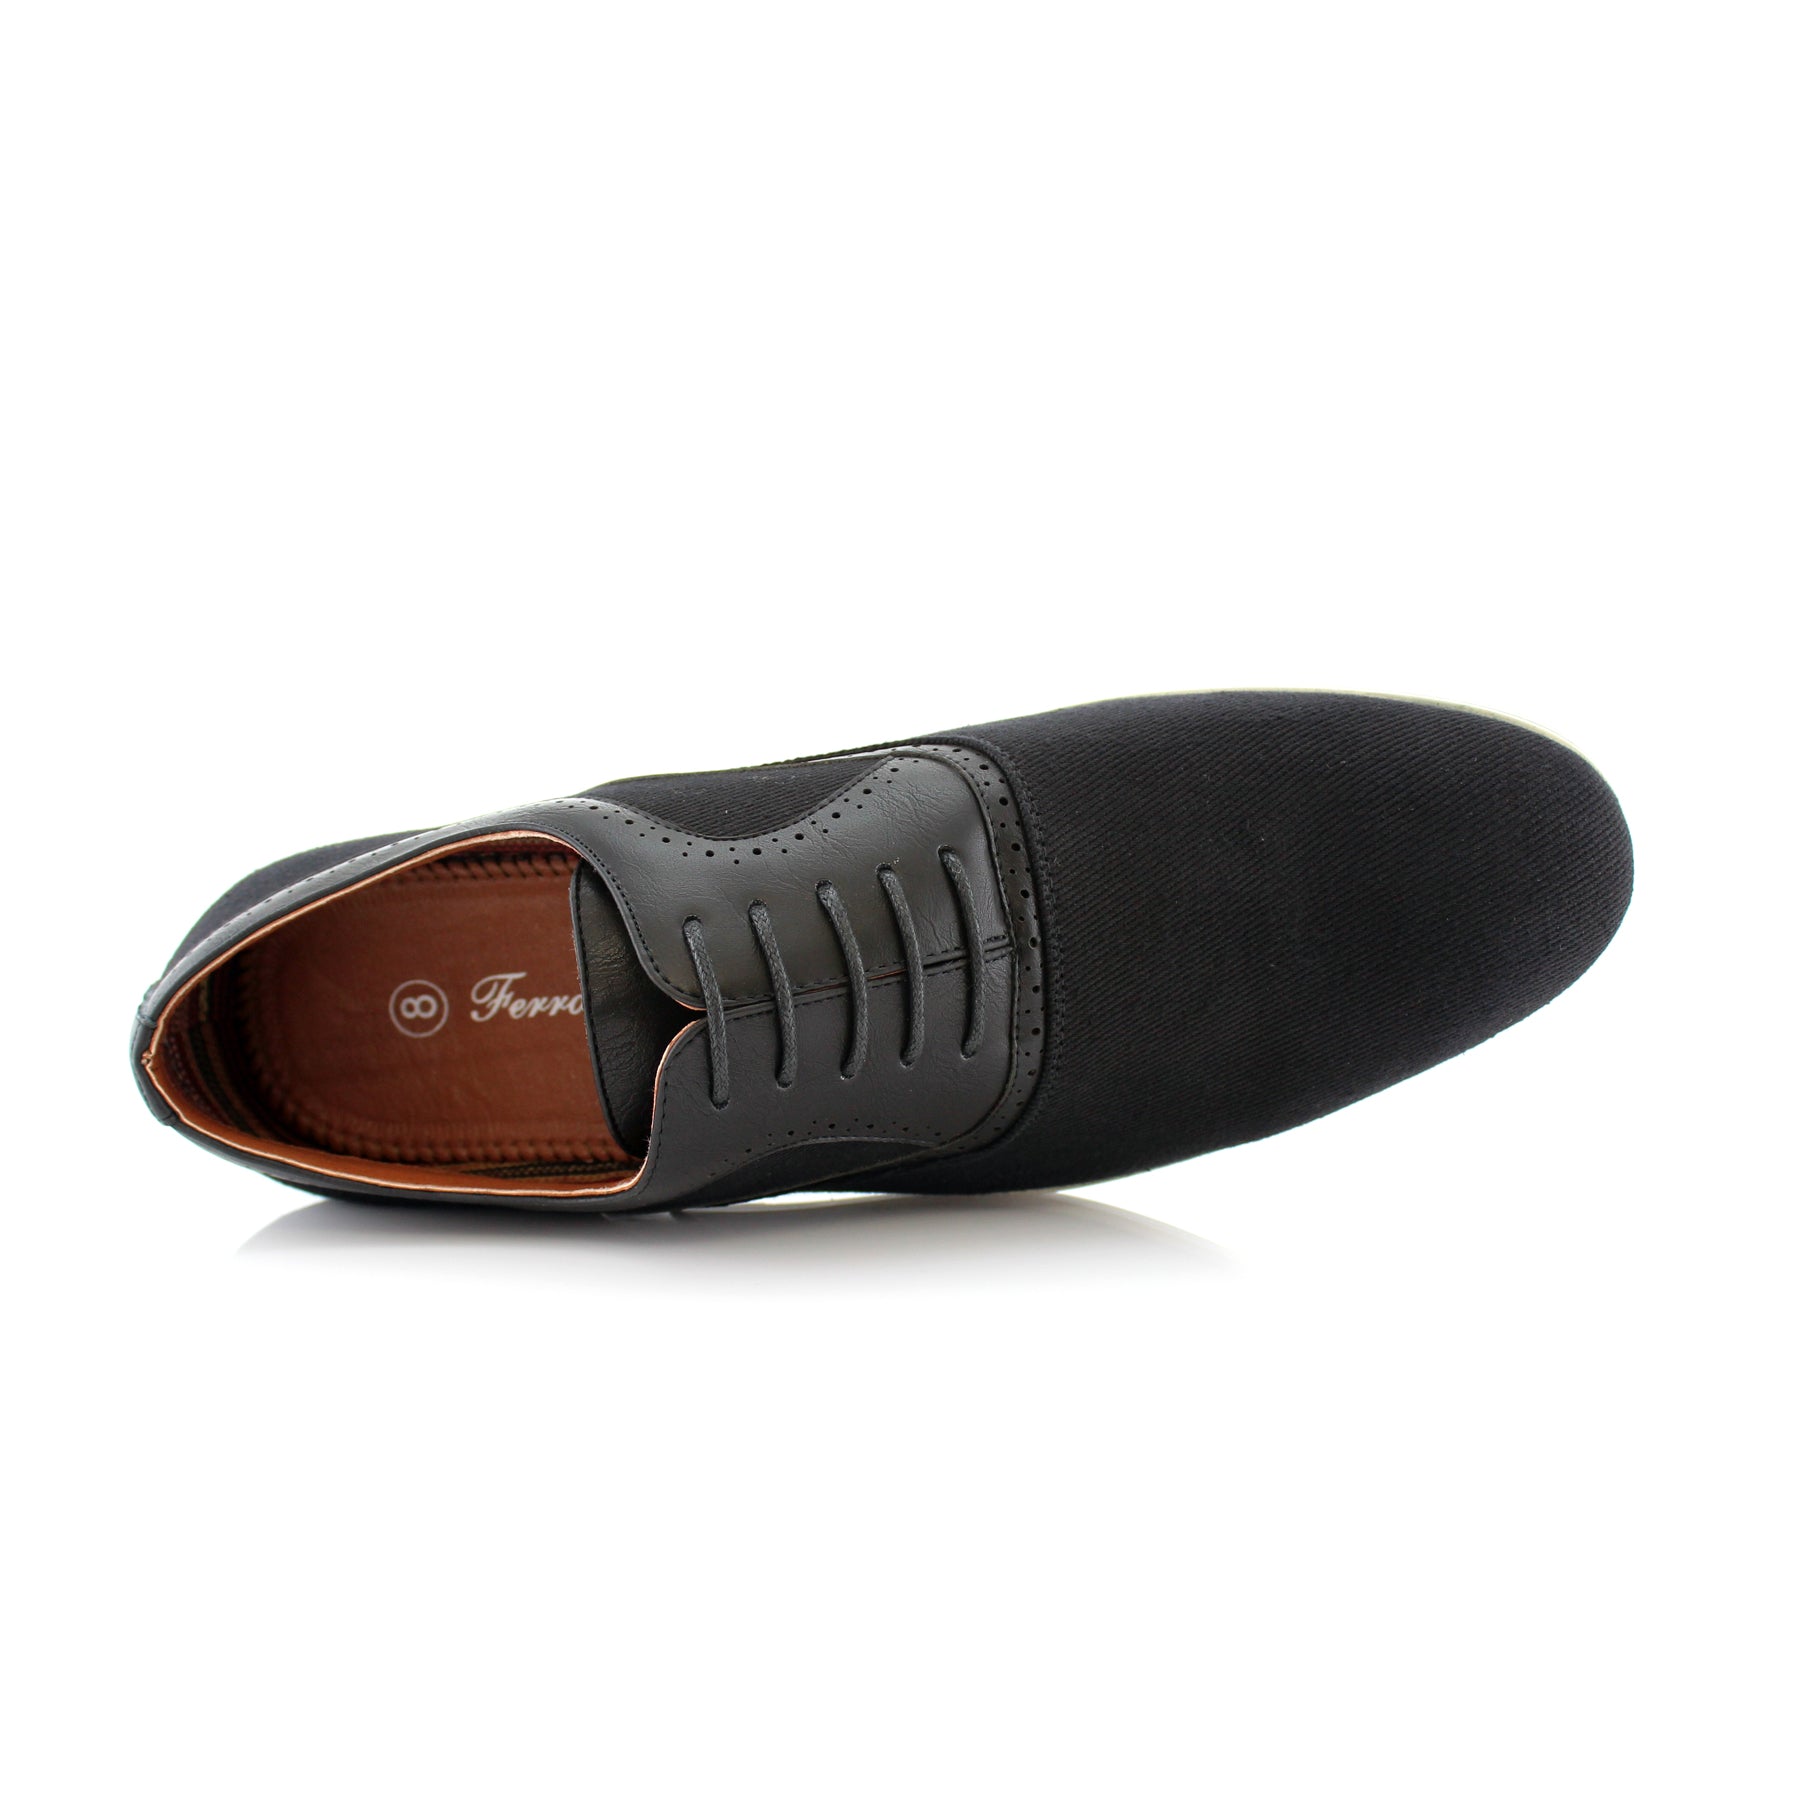 Duo-Textured Casual Oxfords | Edmonds by Ferro Aldo | Conal Footwear | Top-Down Angle View